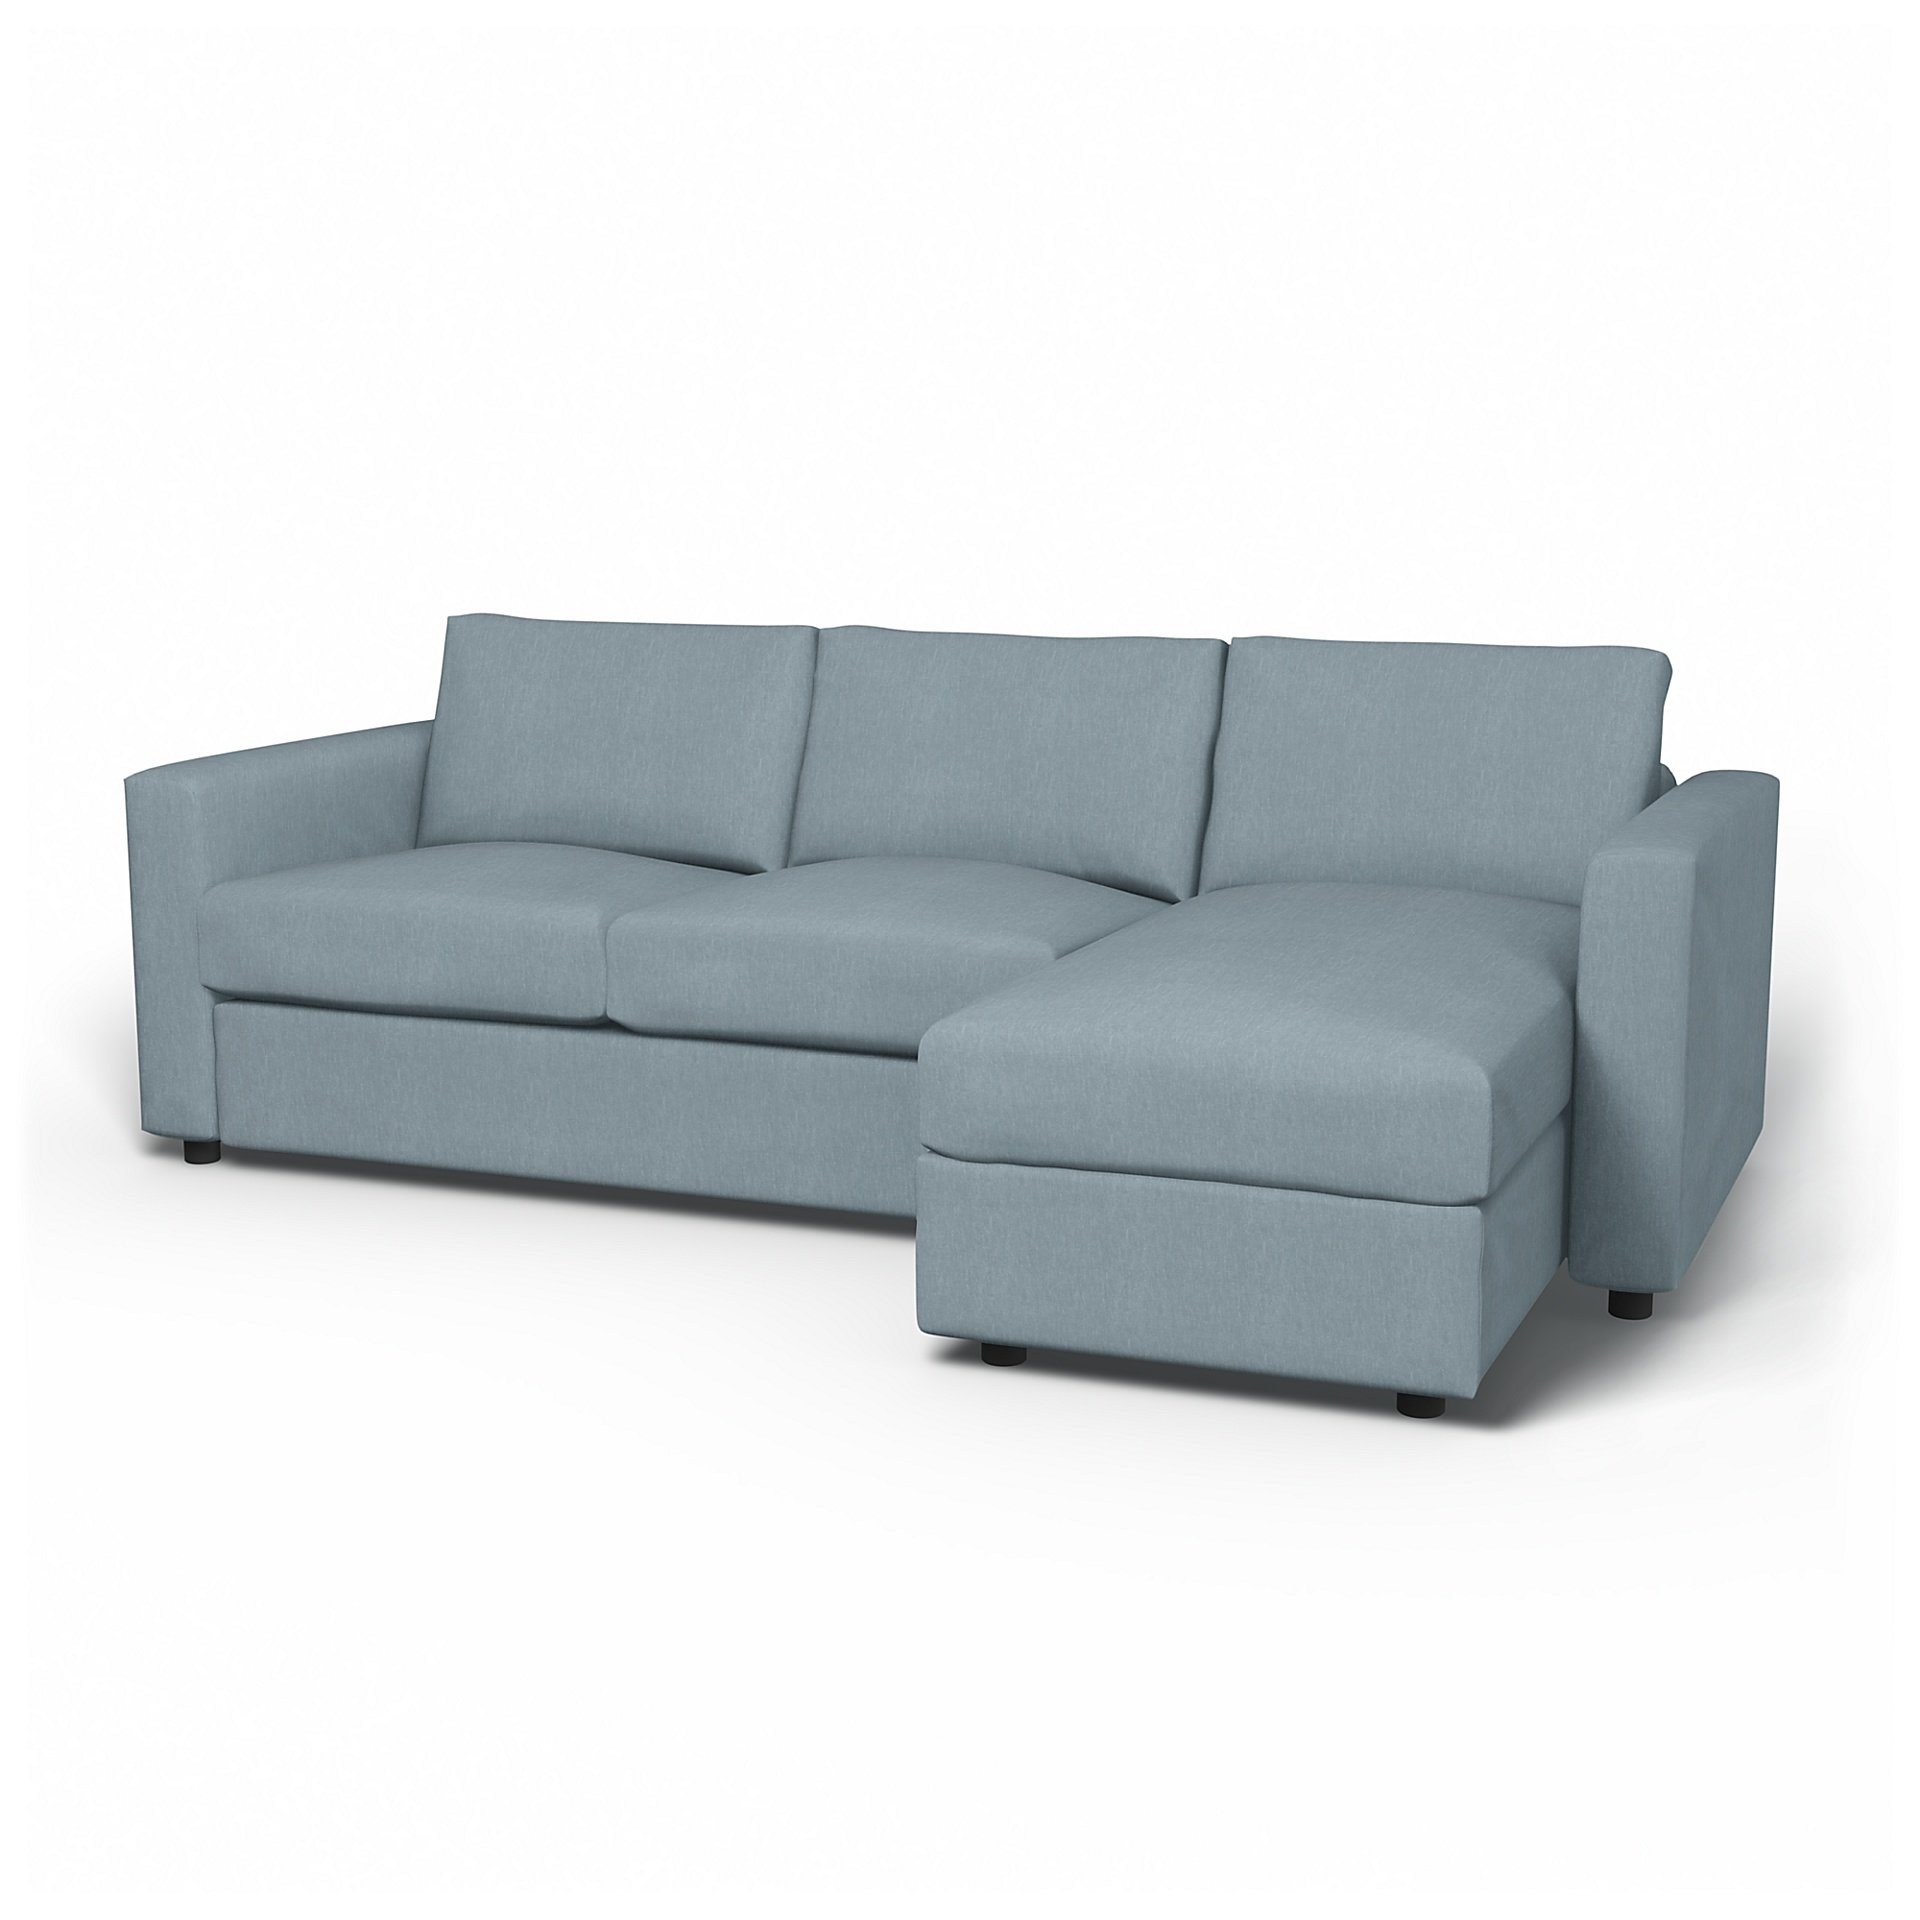 IKEA - Vimle 2 Seater Sofa with Chaise Cover, Dusty Blue, Linen - Bemz